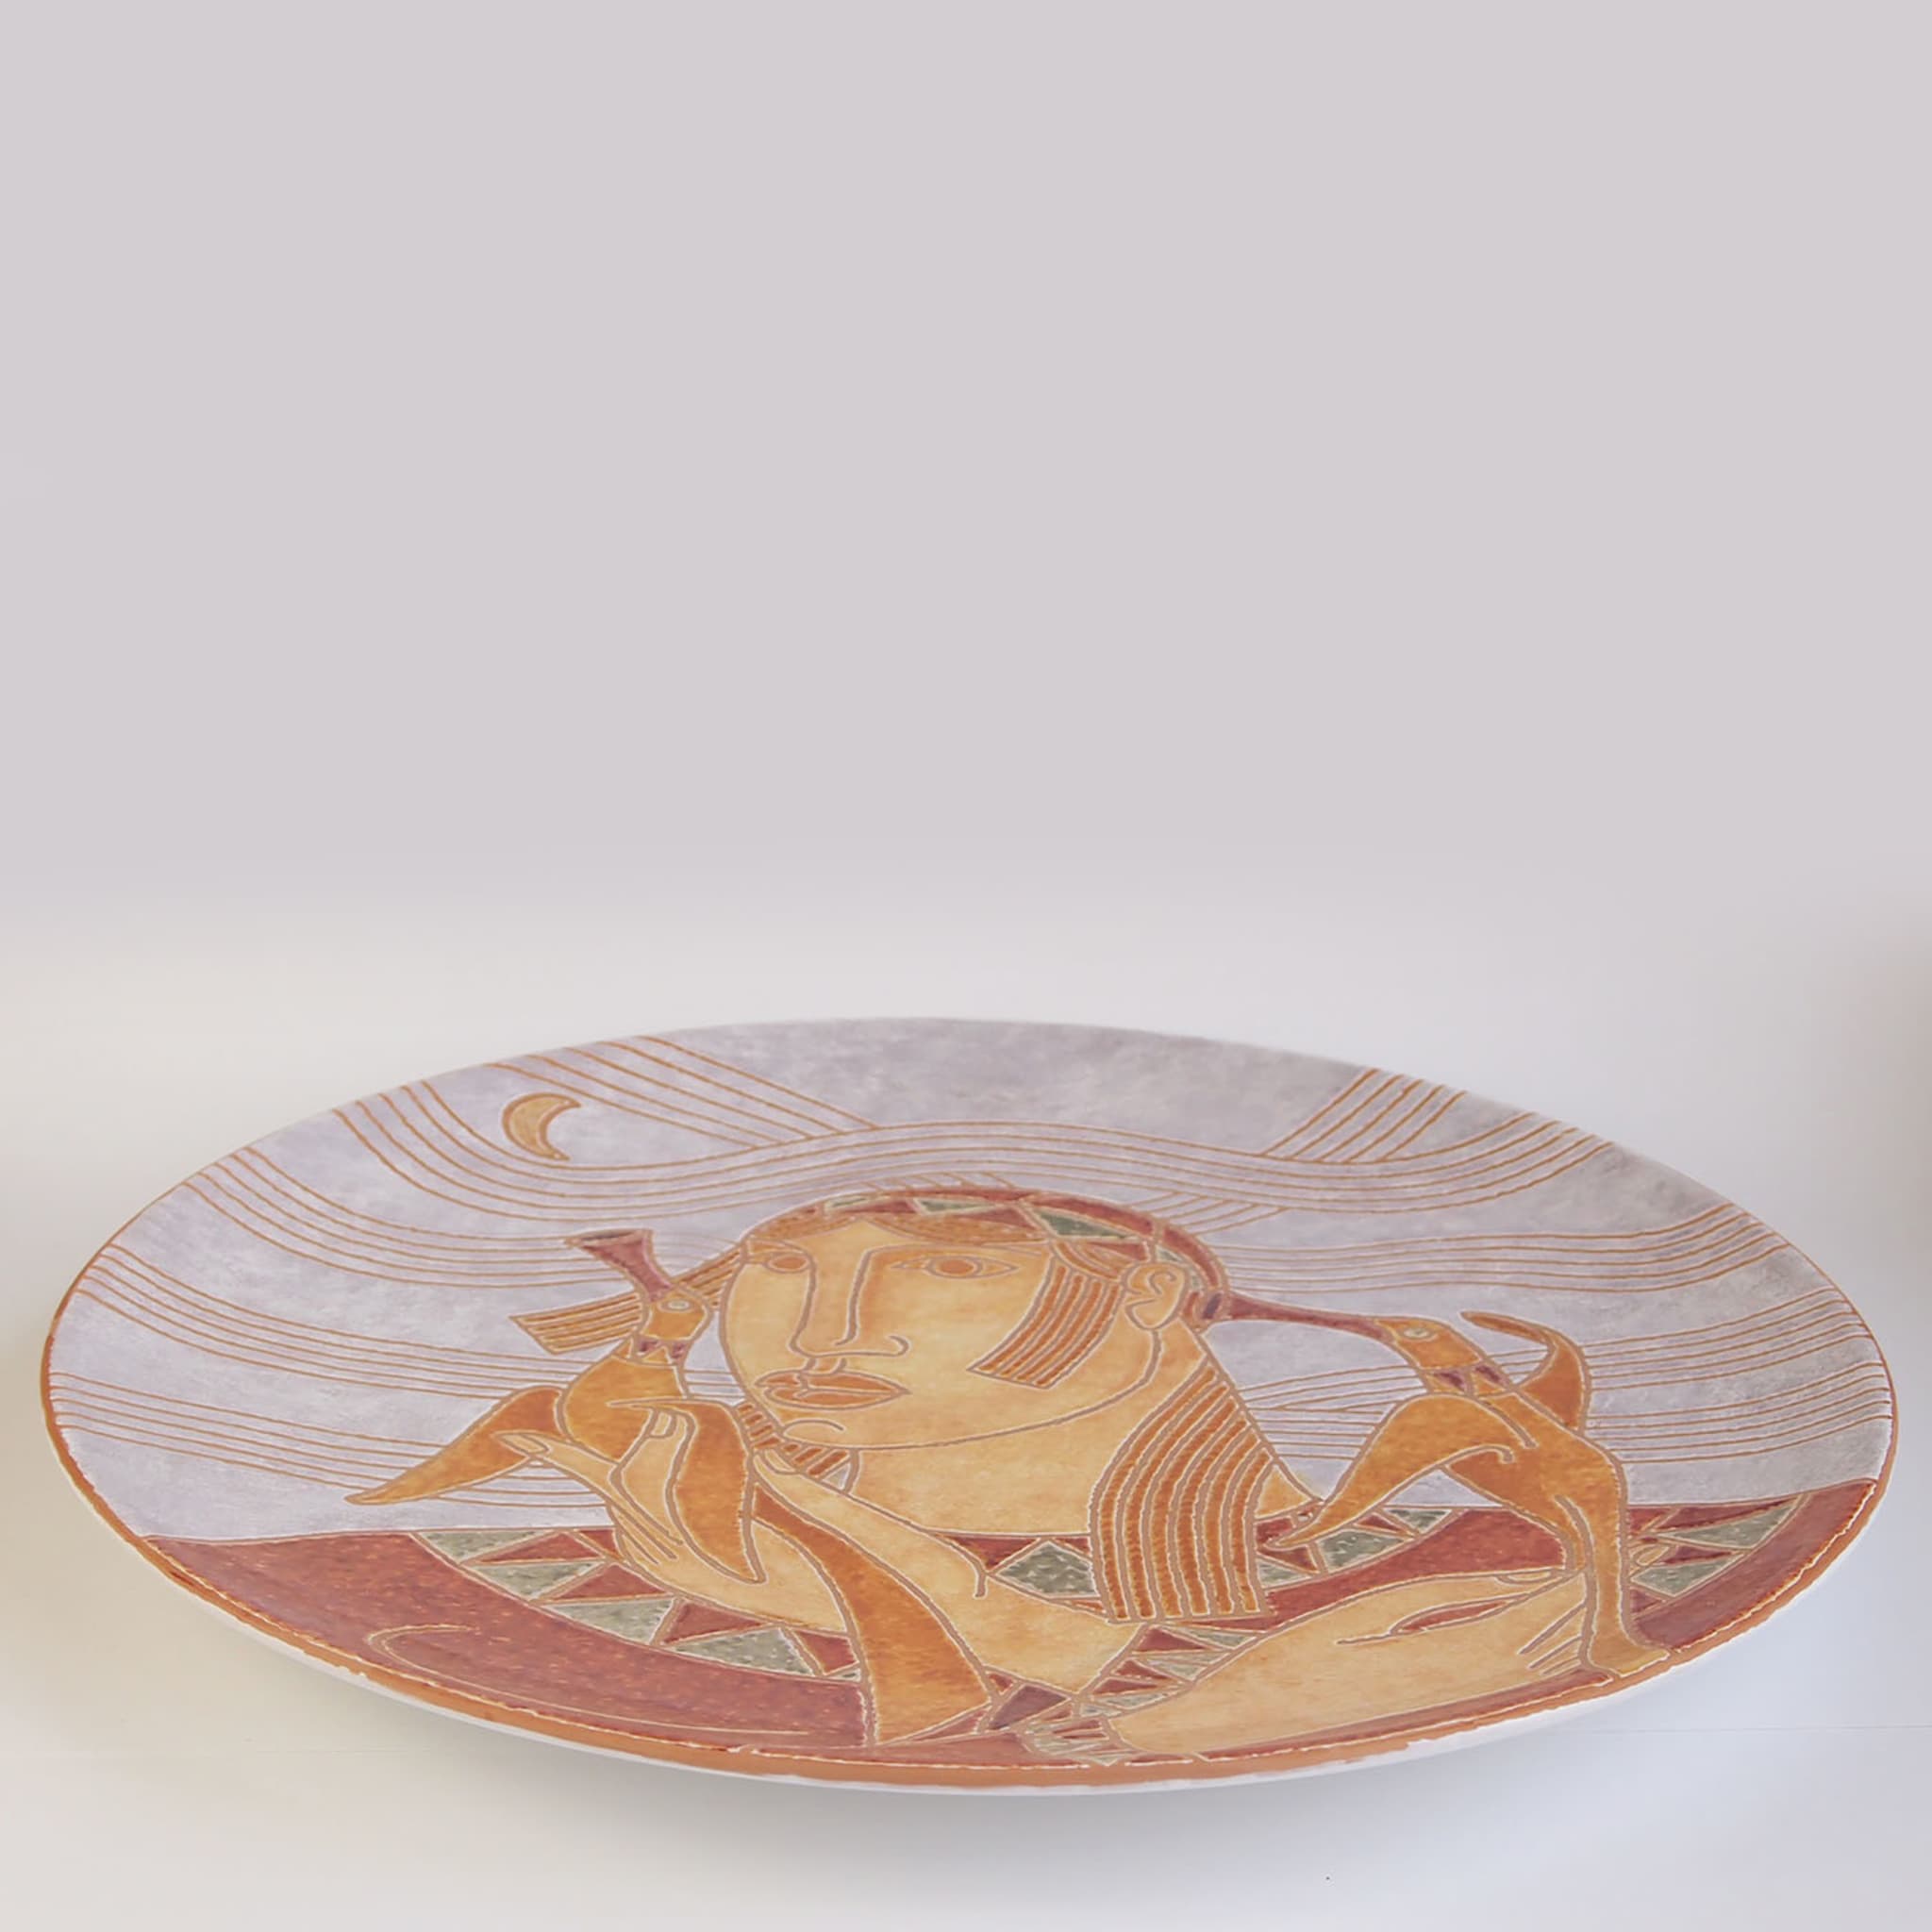 Woman with Birds Patterned Wall Plate - Alternative view 2